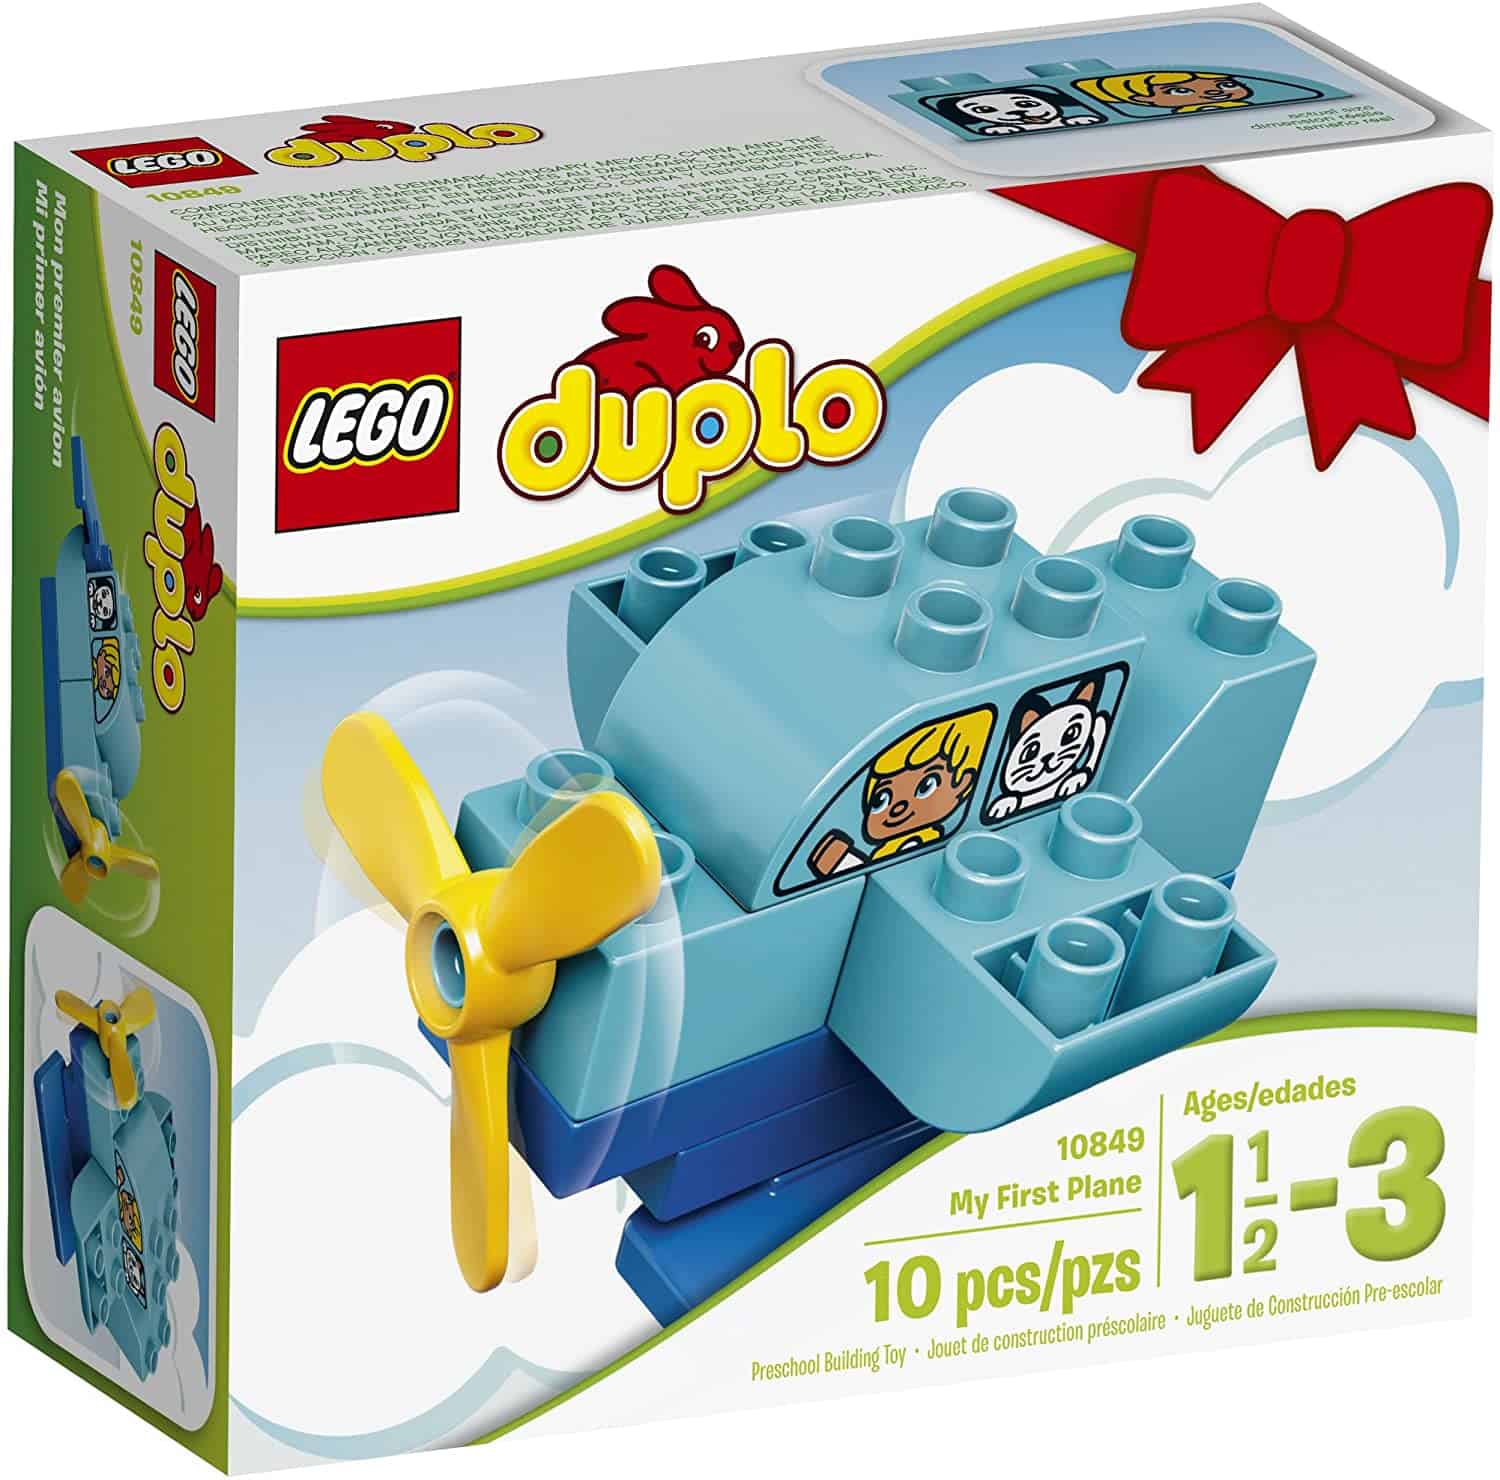 Best for the little ones: LEGO Duplo My first plane 10849